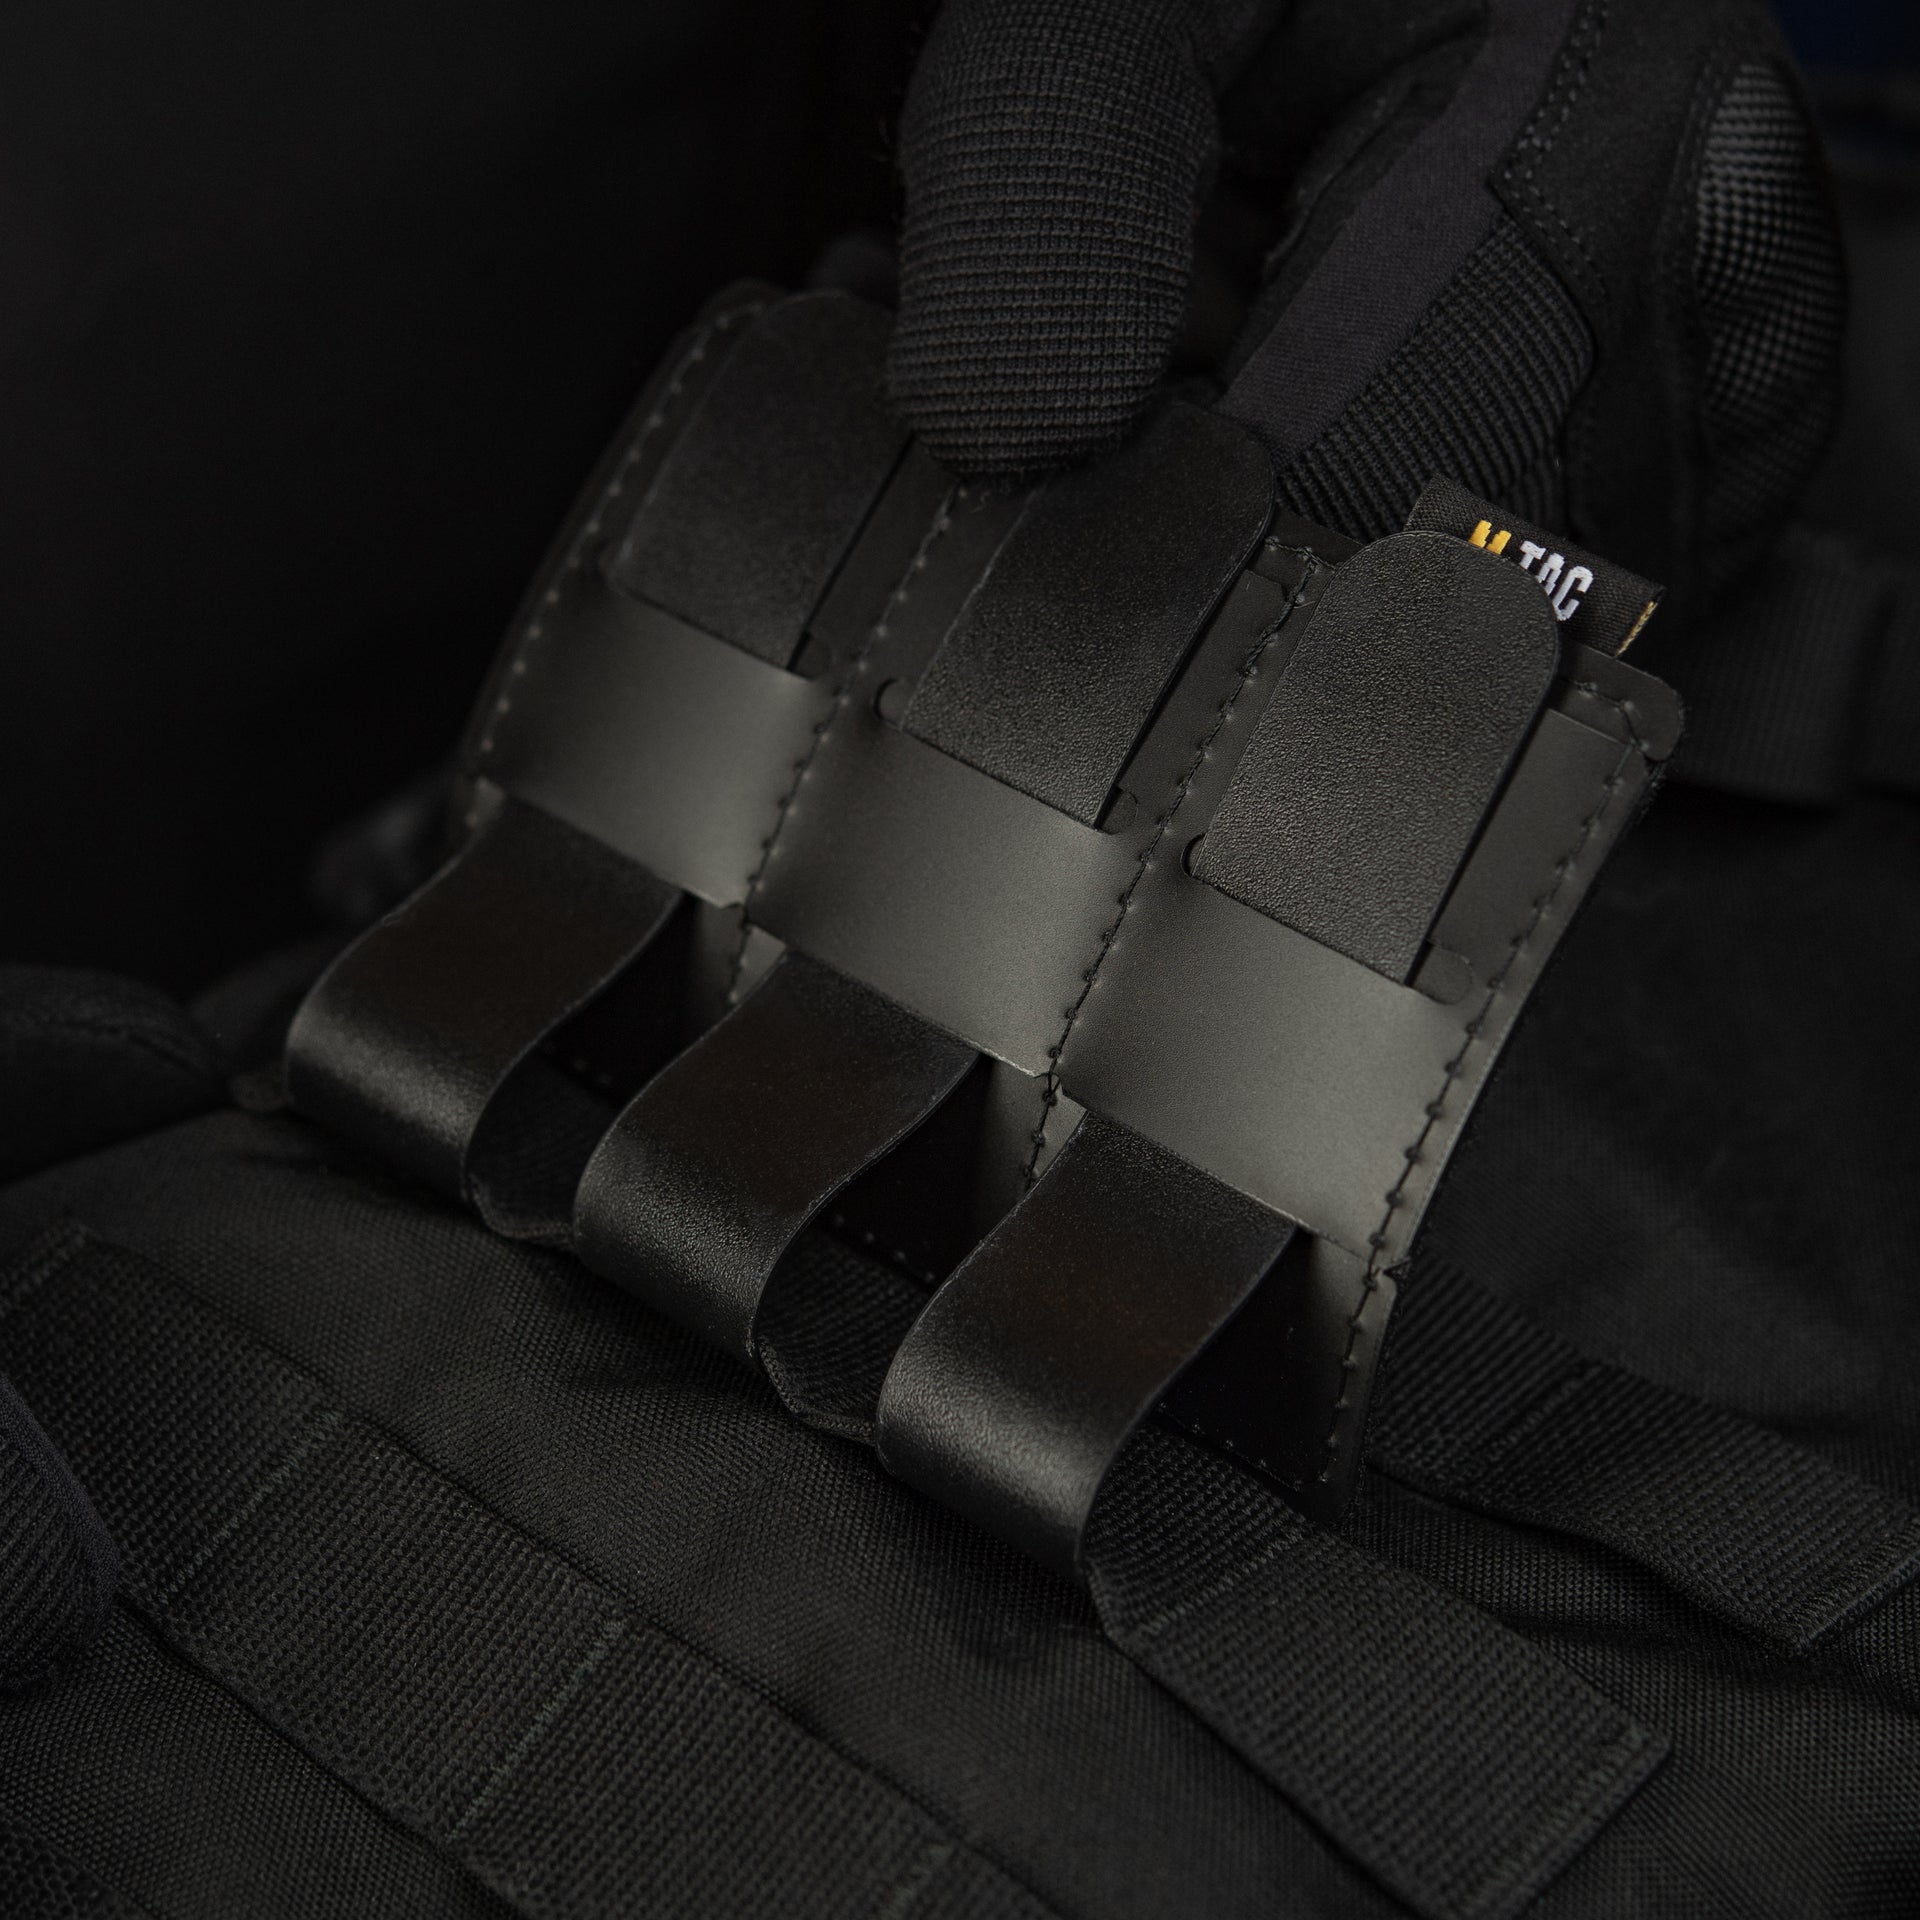 M-Tac Panel for Patches on MOLLE 80x26 - Military Shop Online